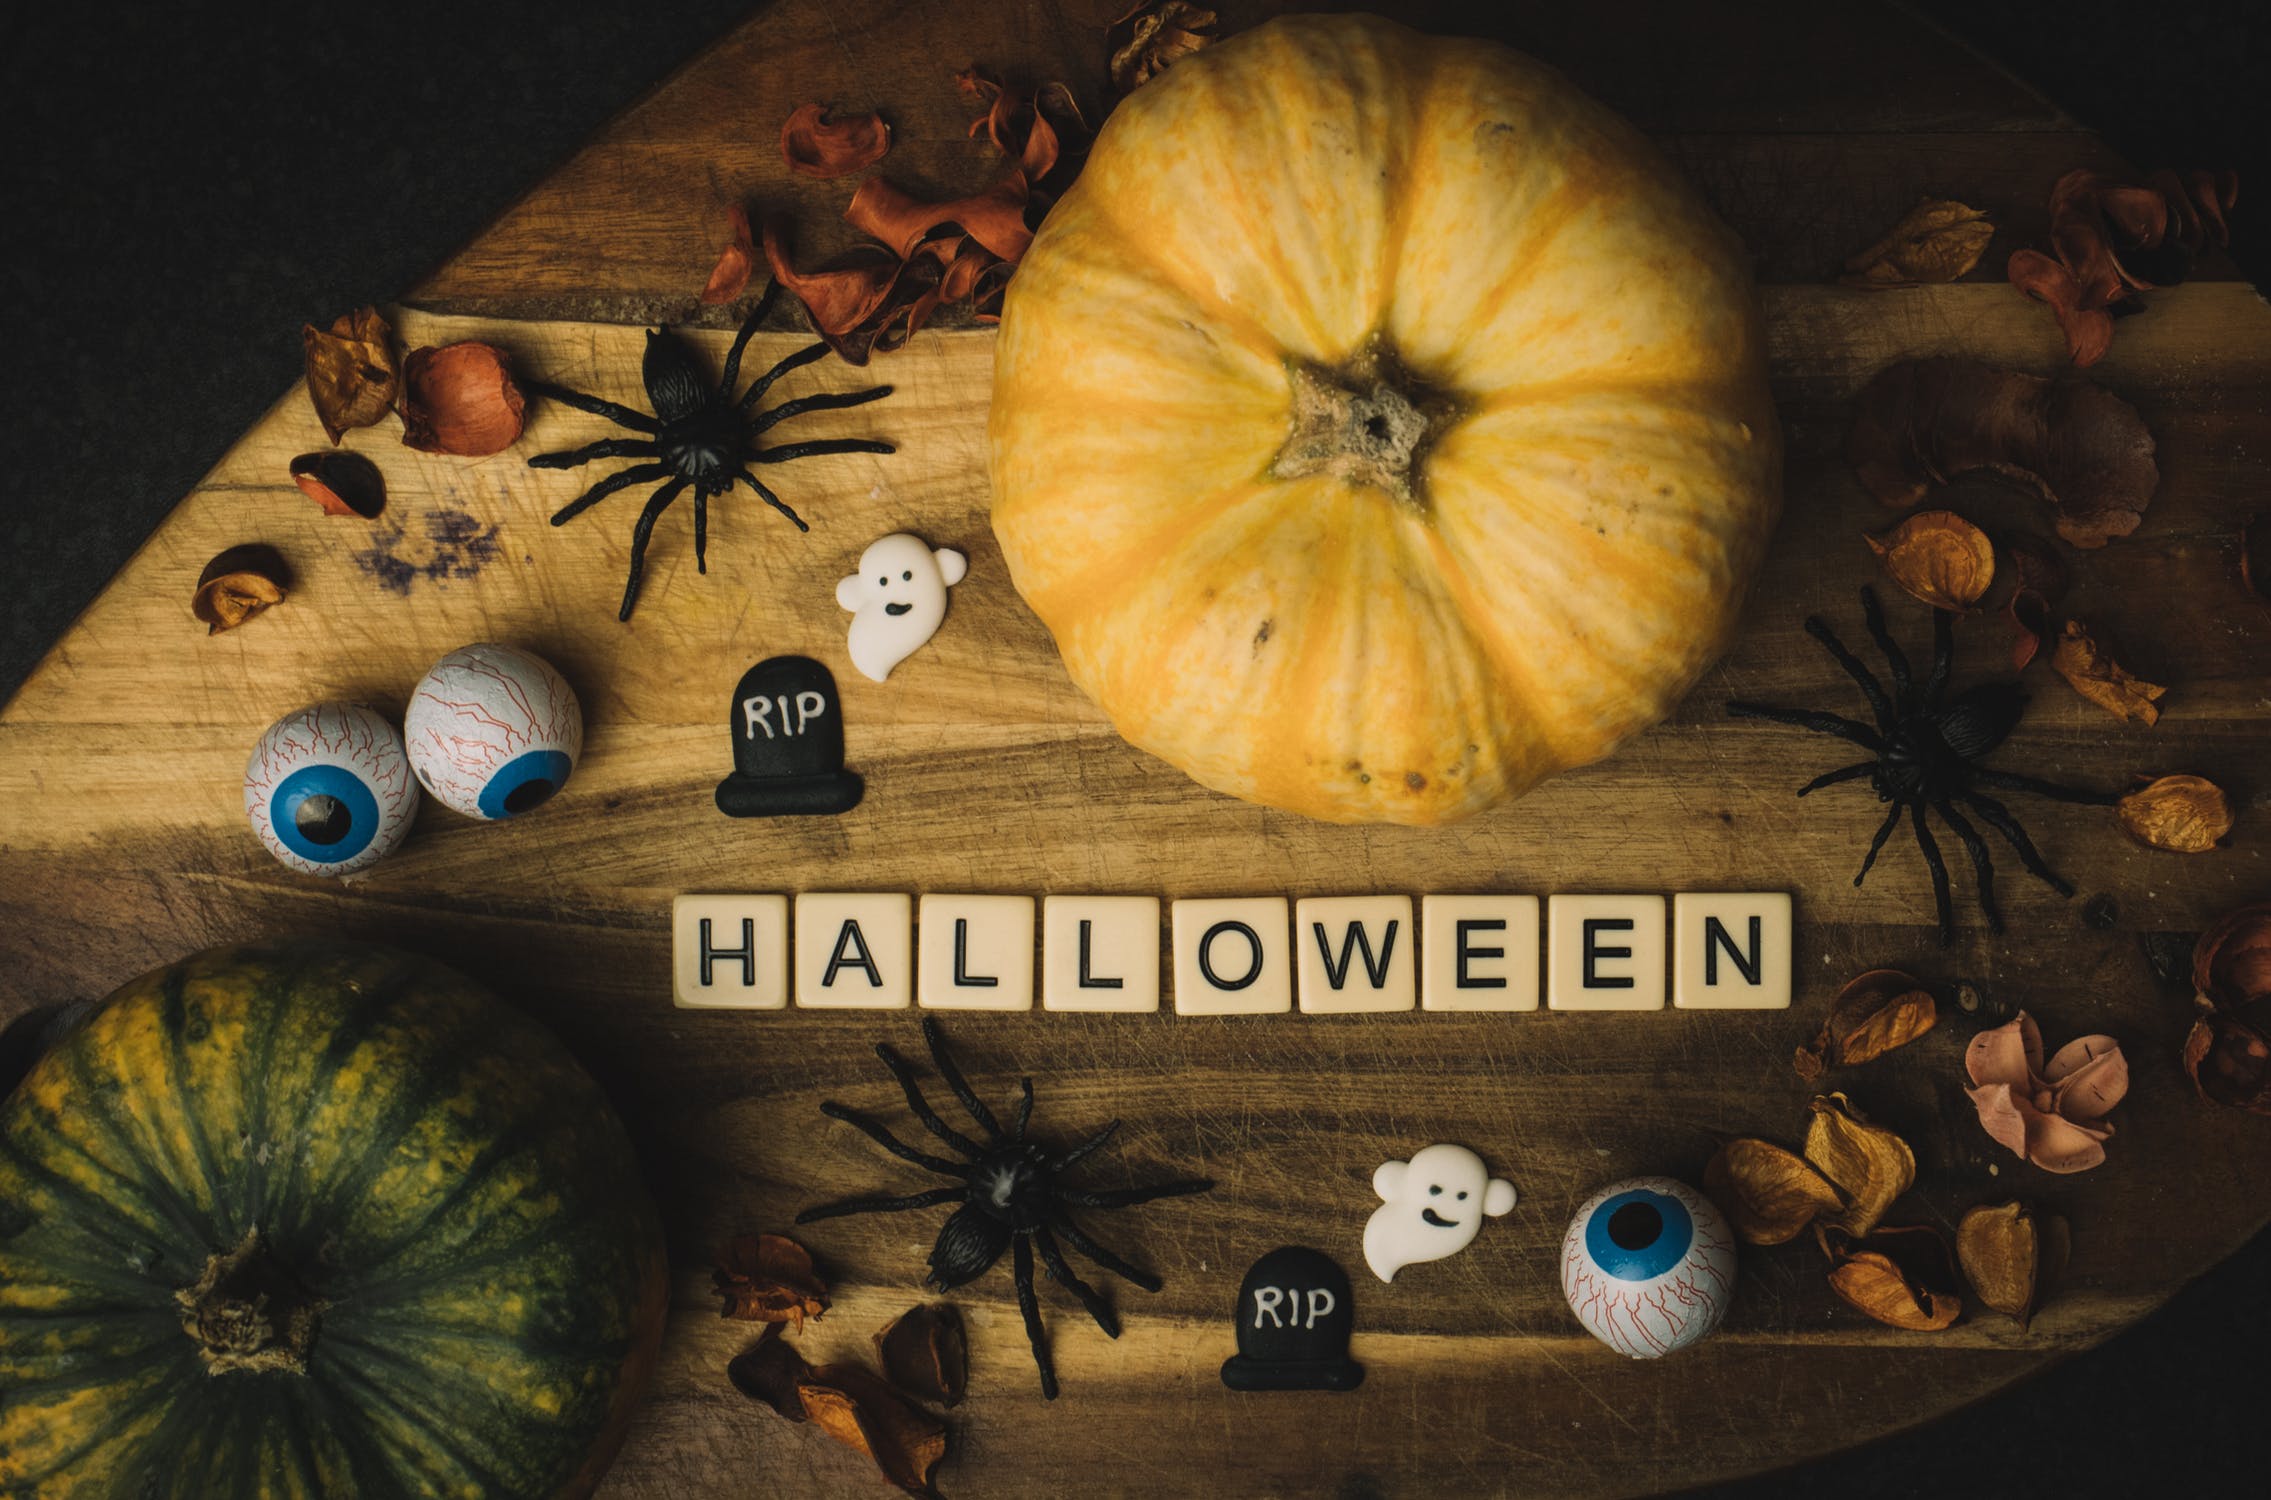 How To Celebrate Halloween Safely During COVID-19